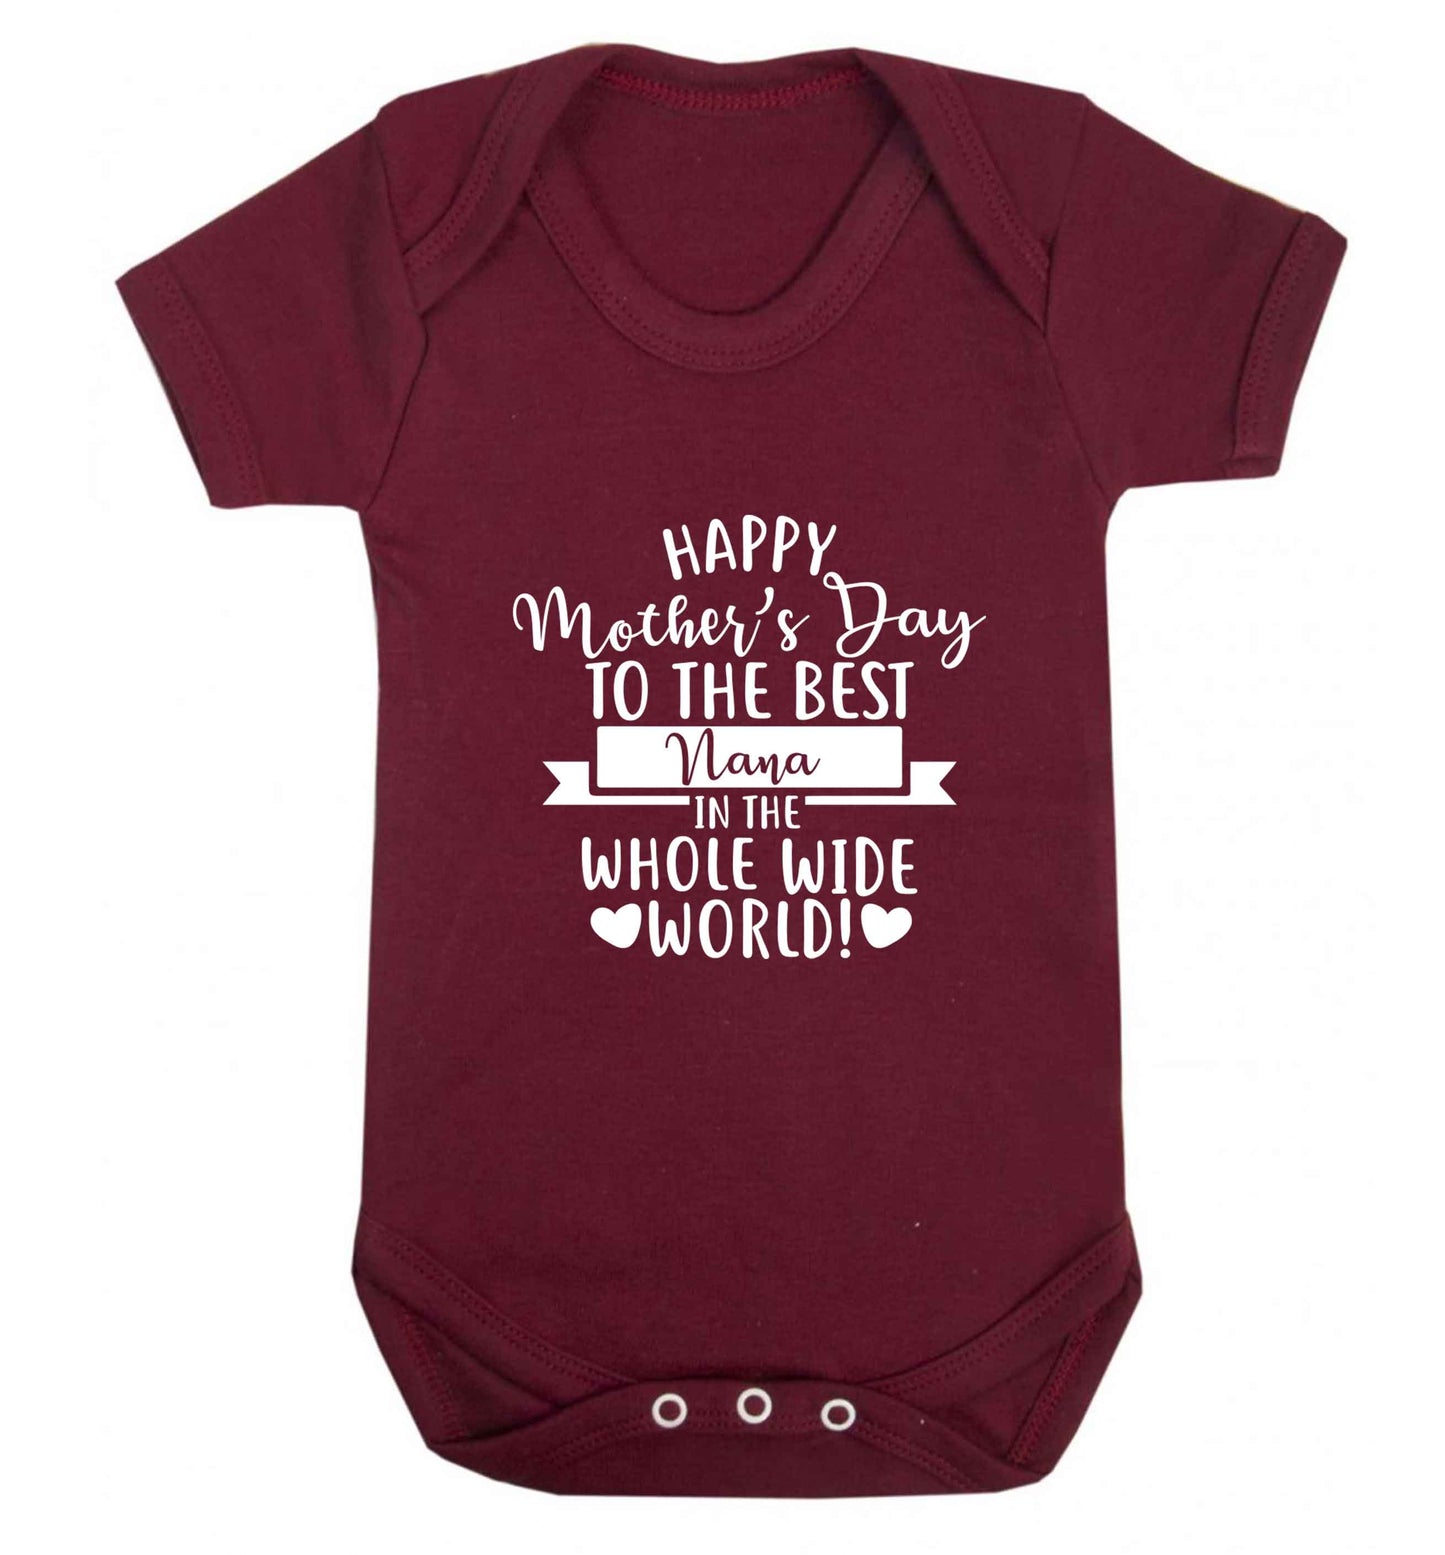 Happy mother's day to the best nana in the world baby vest maroon 18-24 months